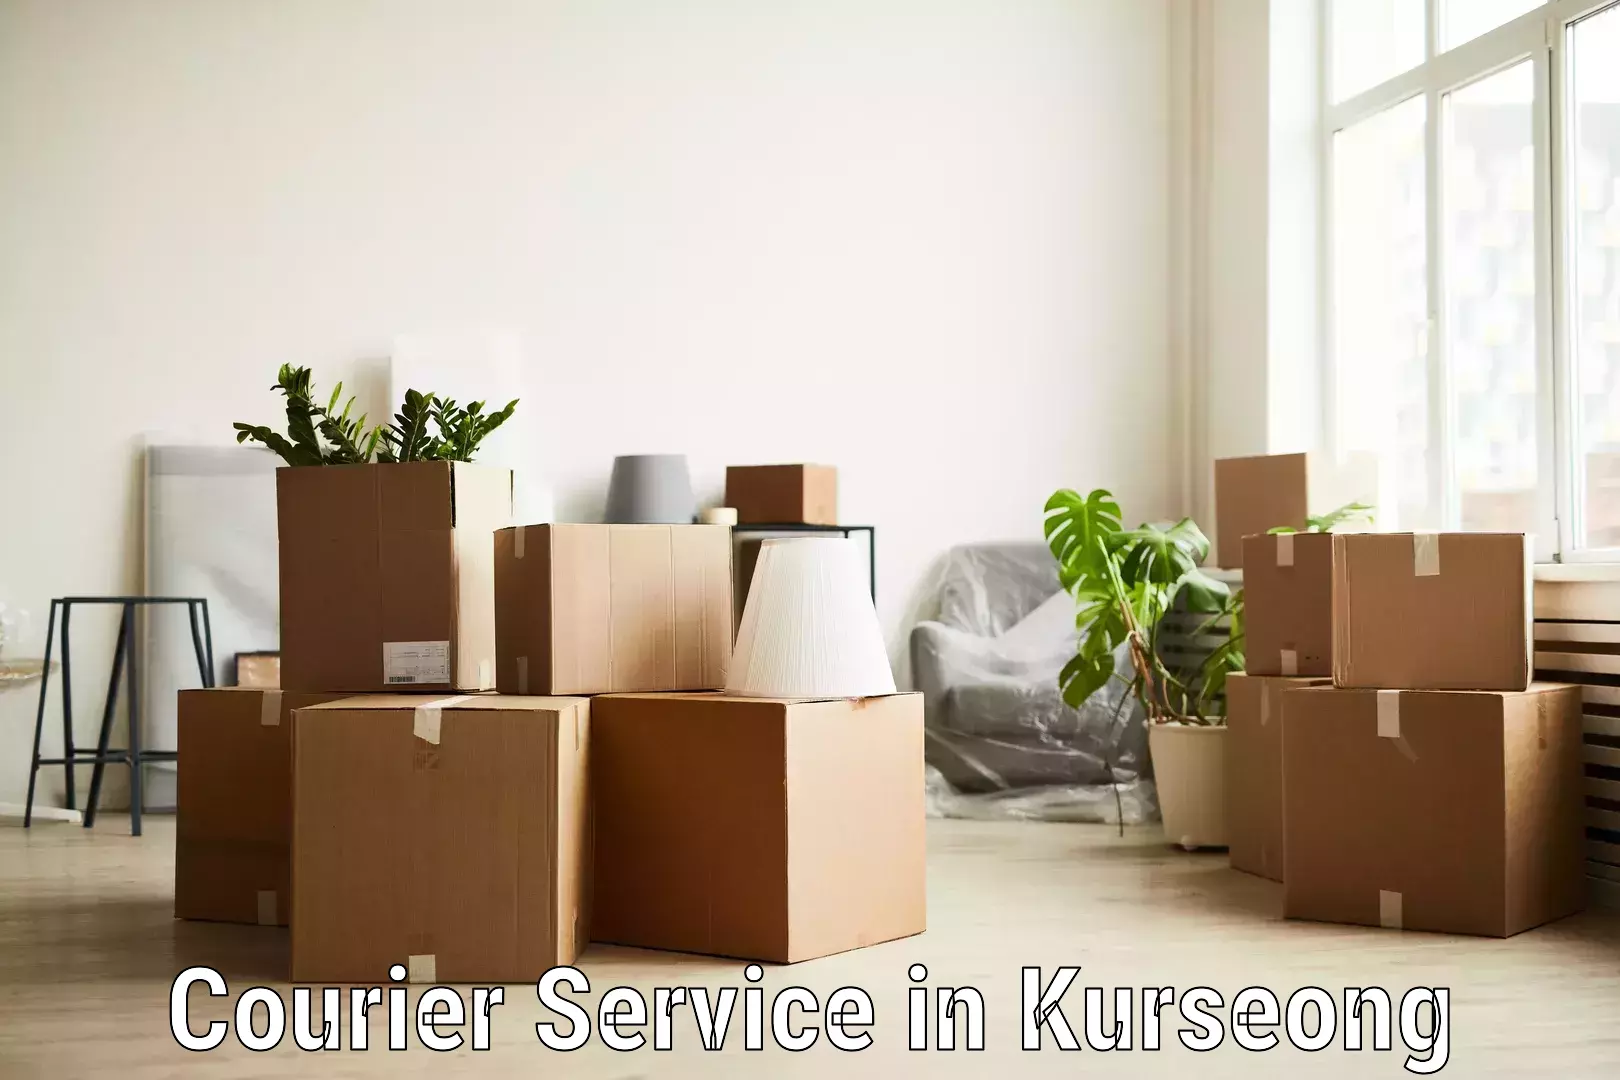 Secure freight services in Kurseong